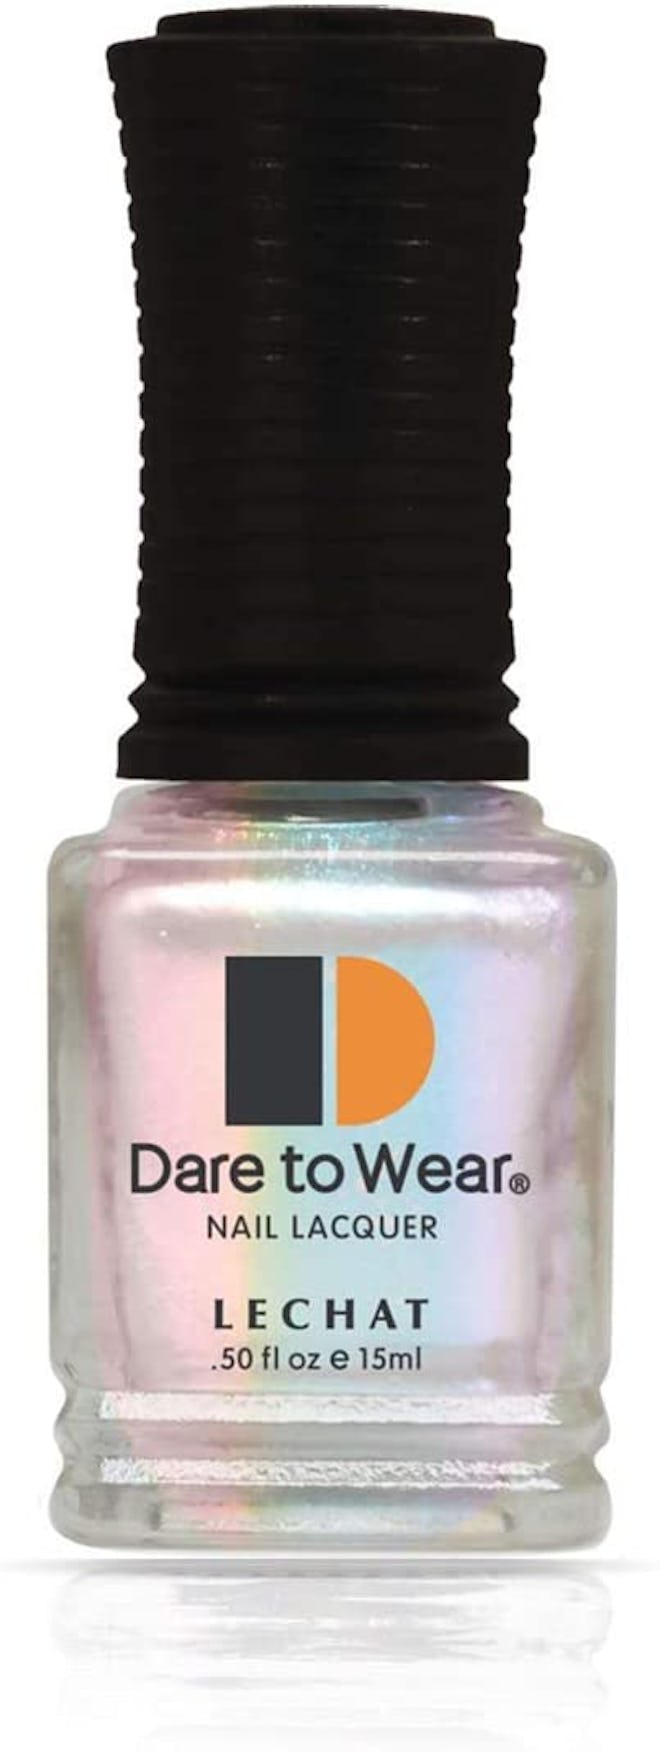 LeChat Nails Dare to Wear Lacquer in Metallux Unicorn Tears